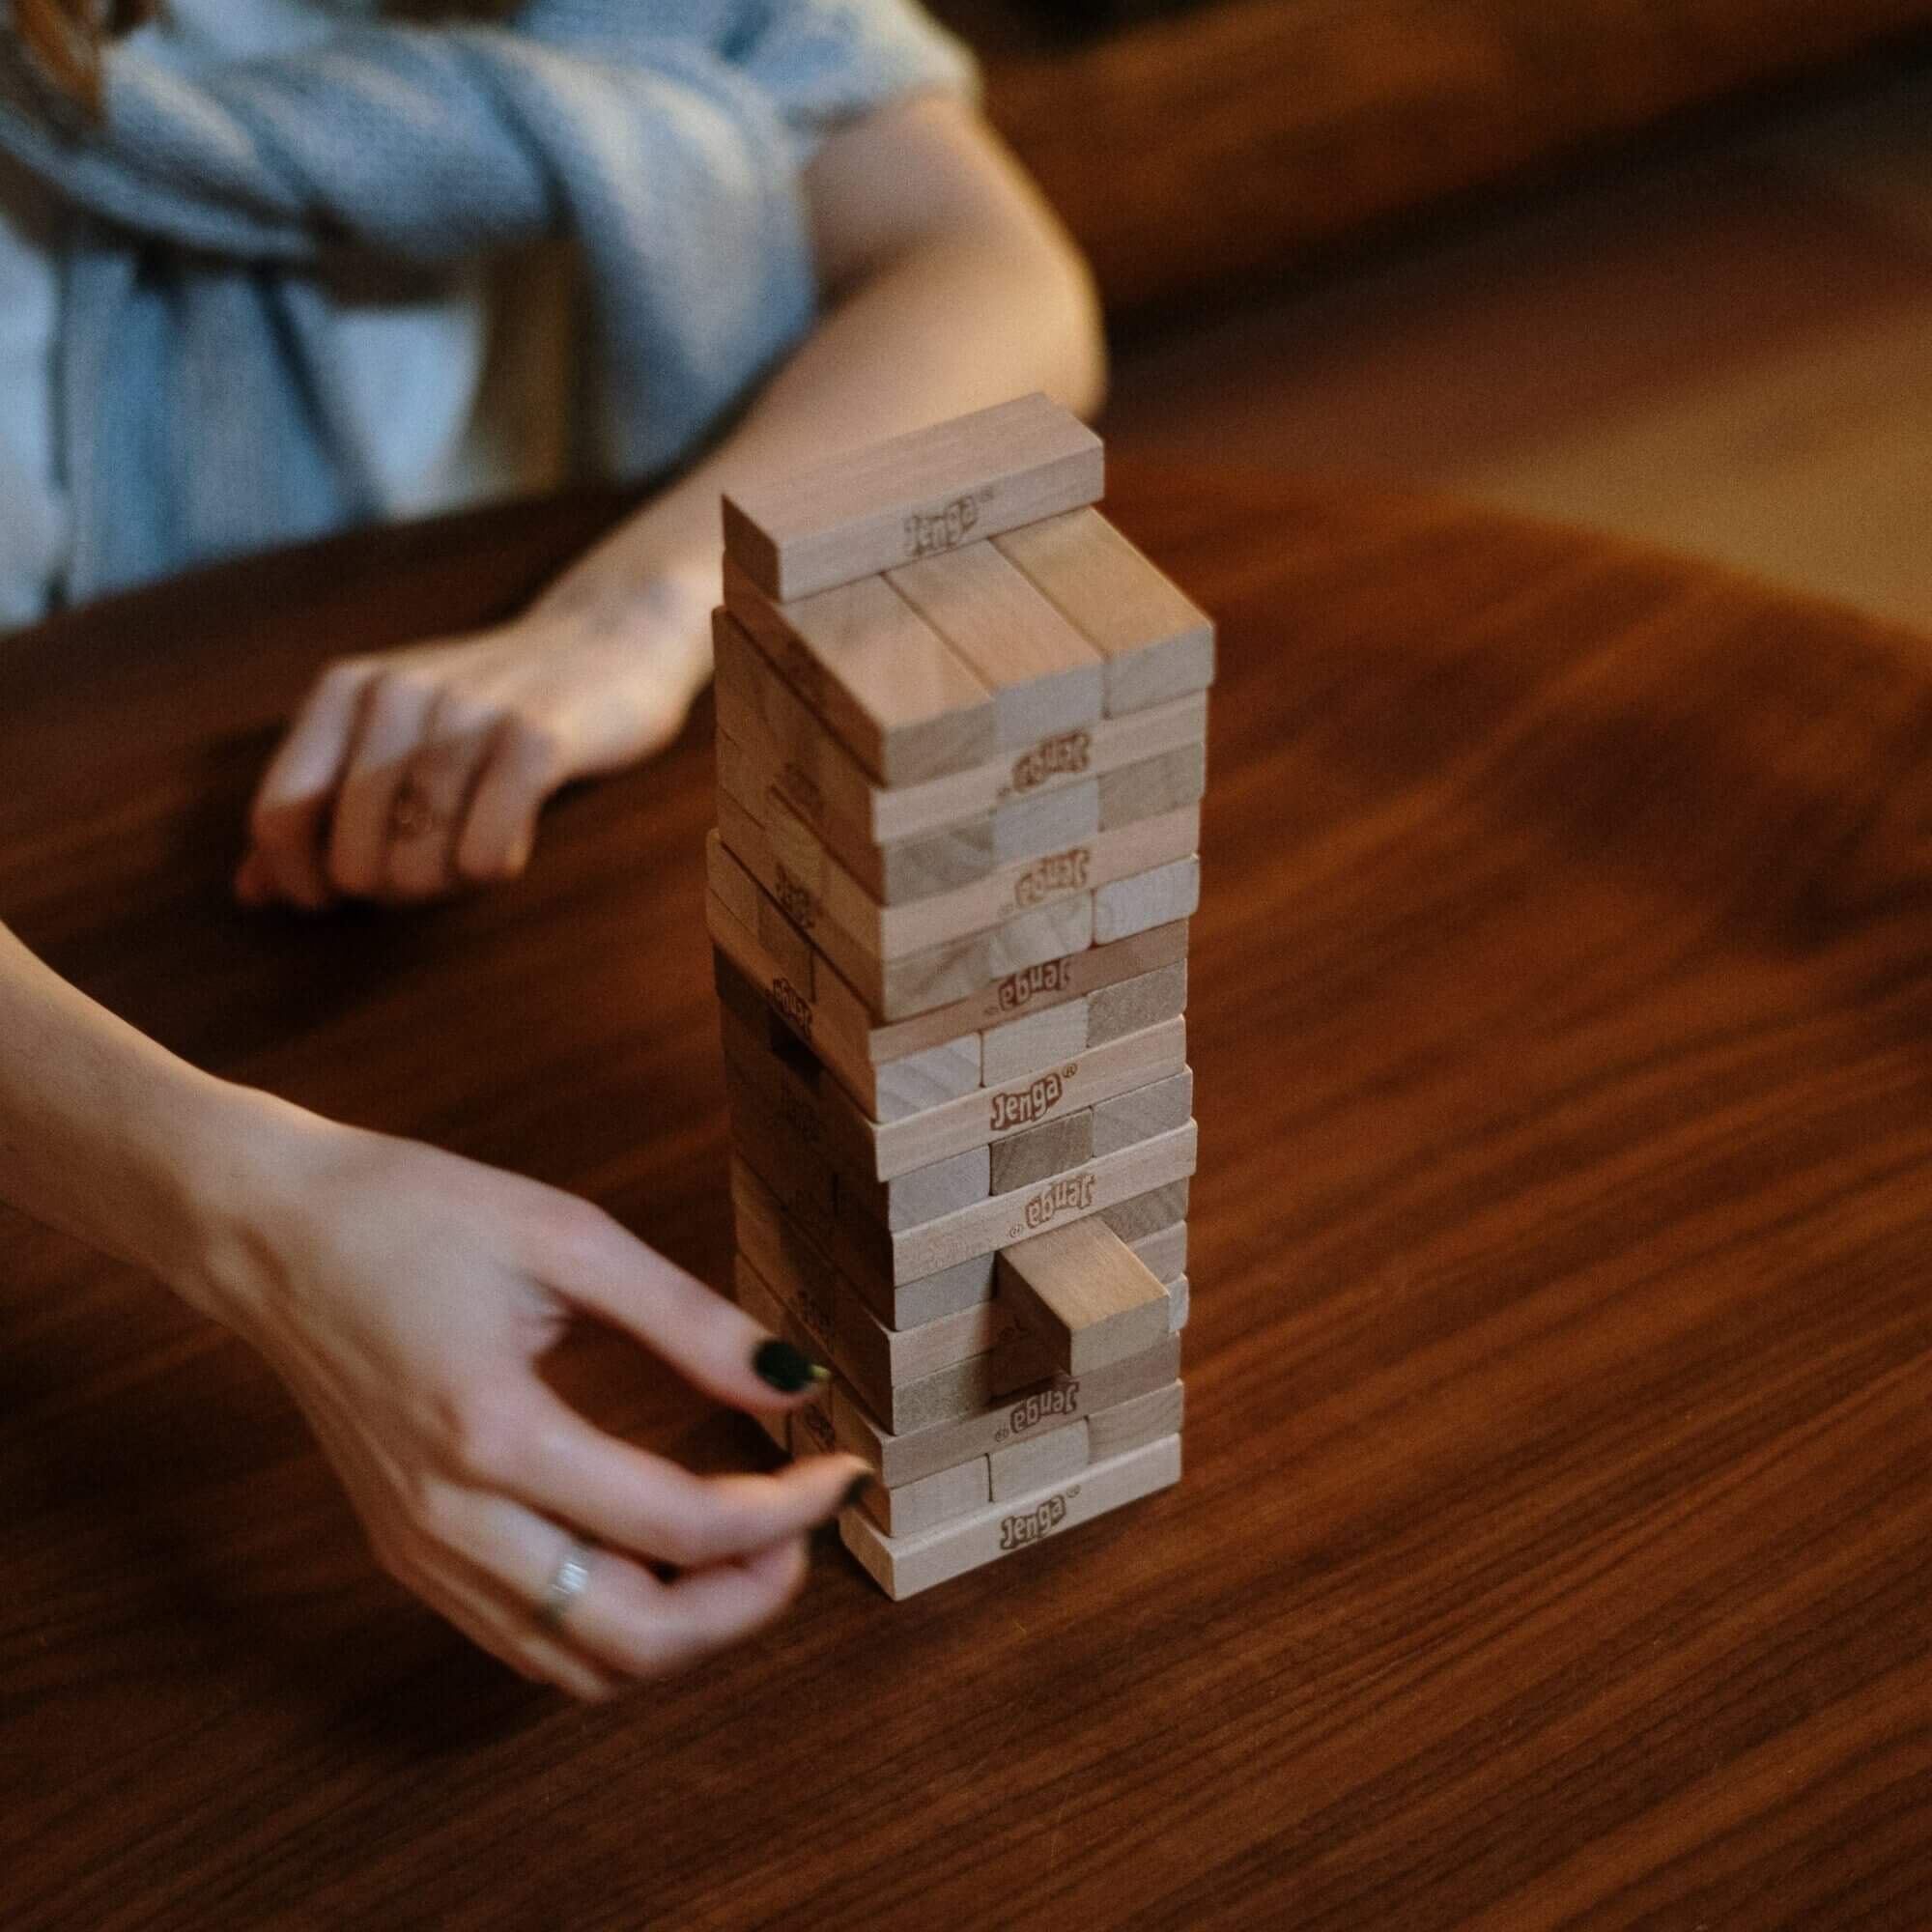 A woman playing a game of jenga on a wooden table.